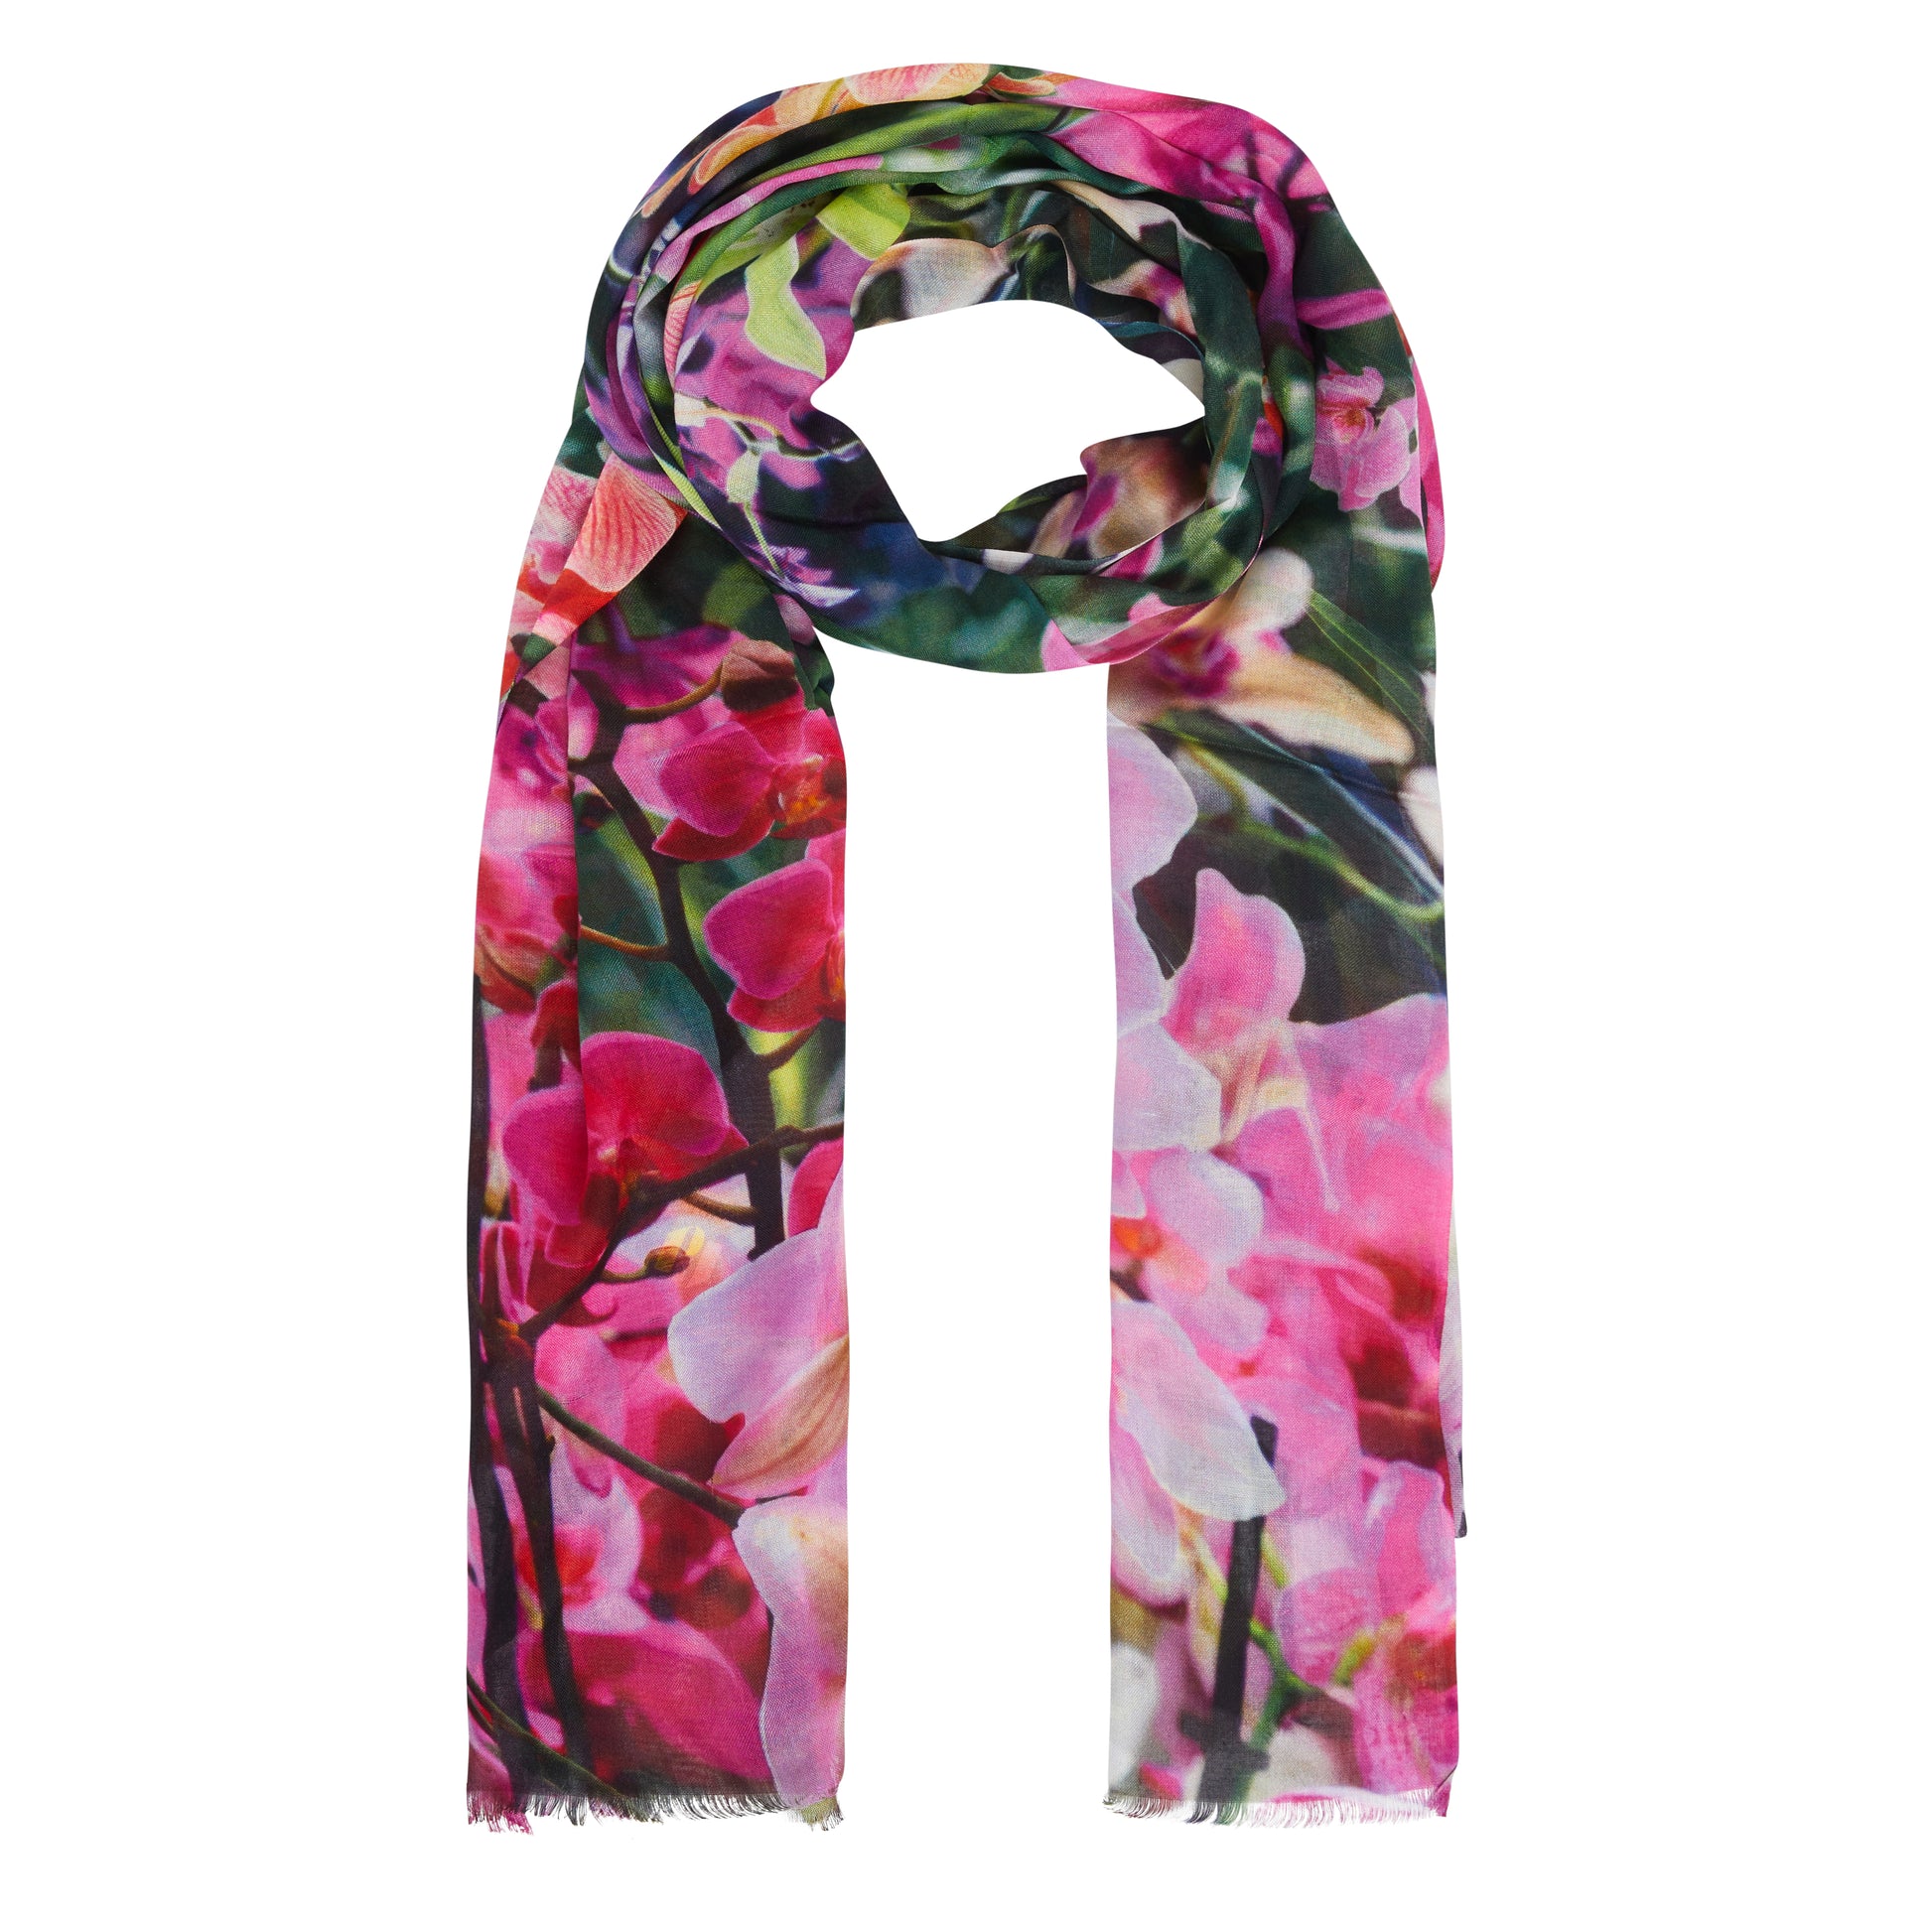 Silk/modal scarf with pink orchids design, based on photography from Cambridge University Botanic Garden.